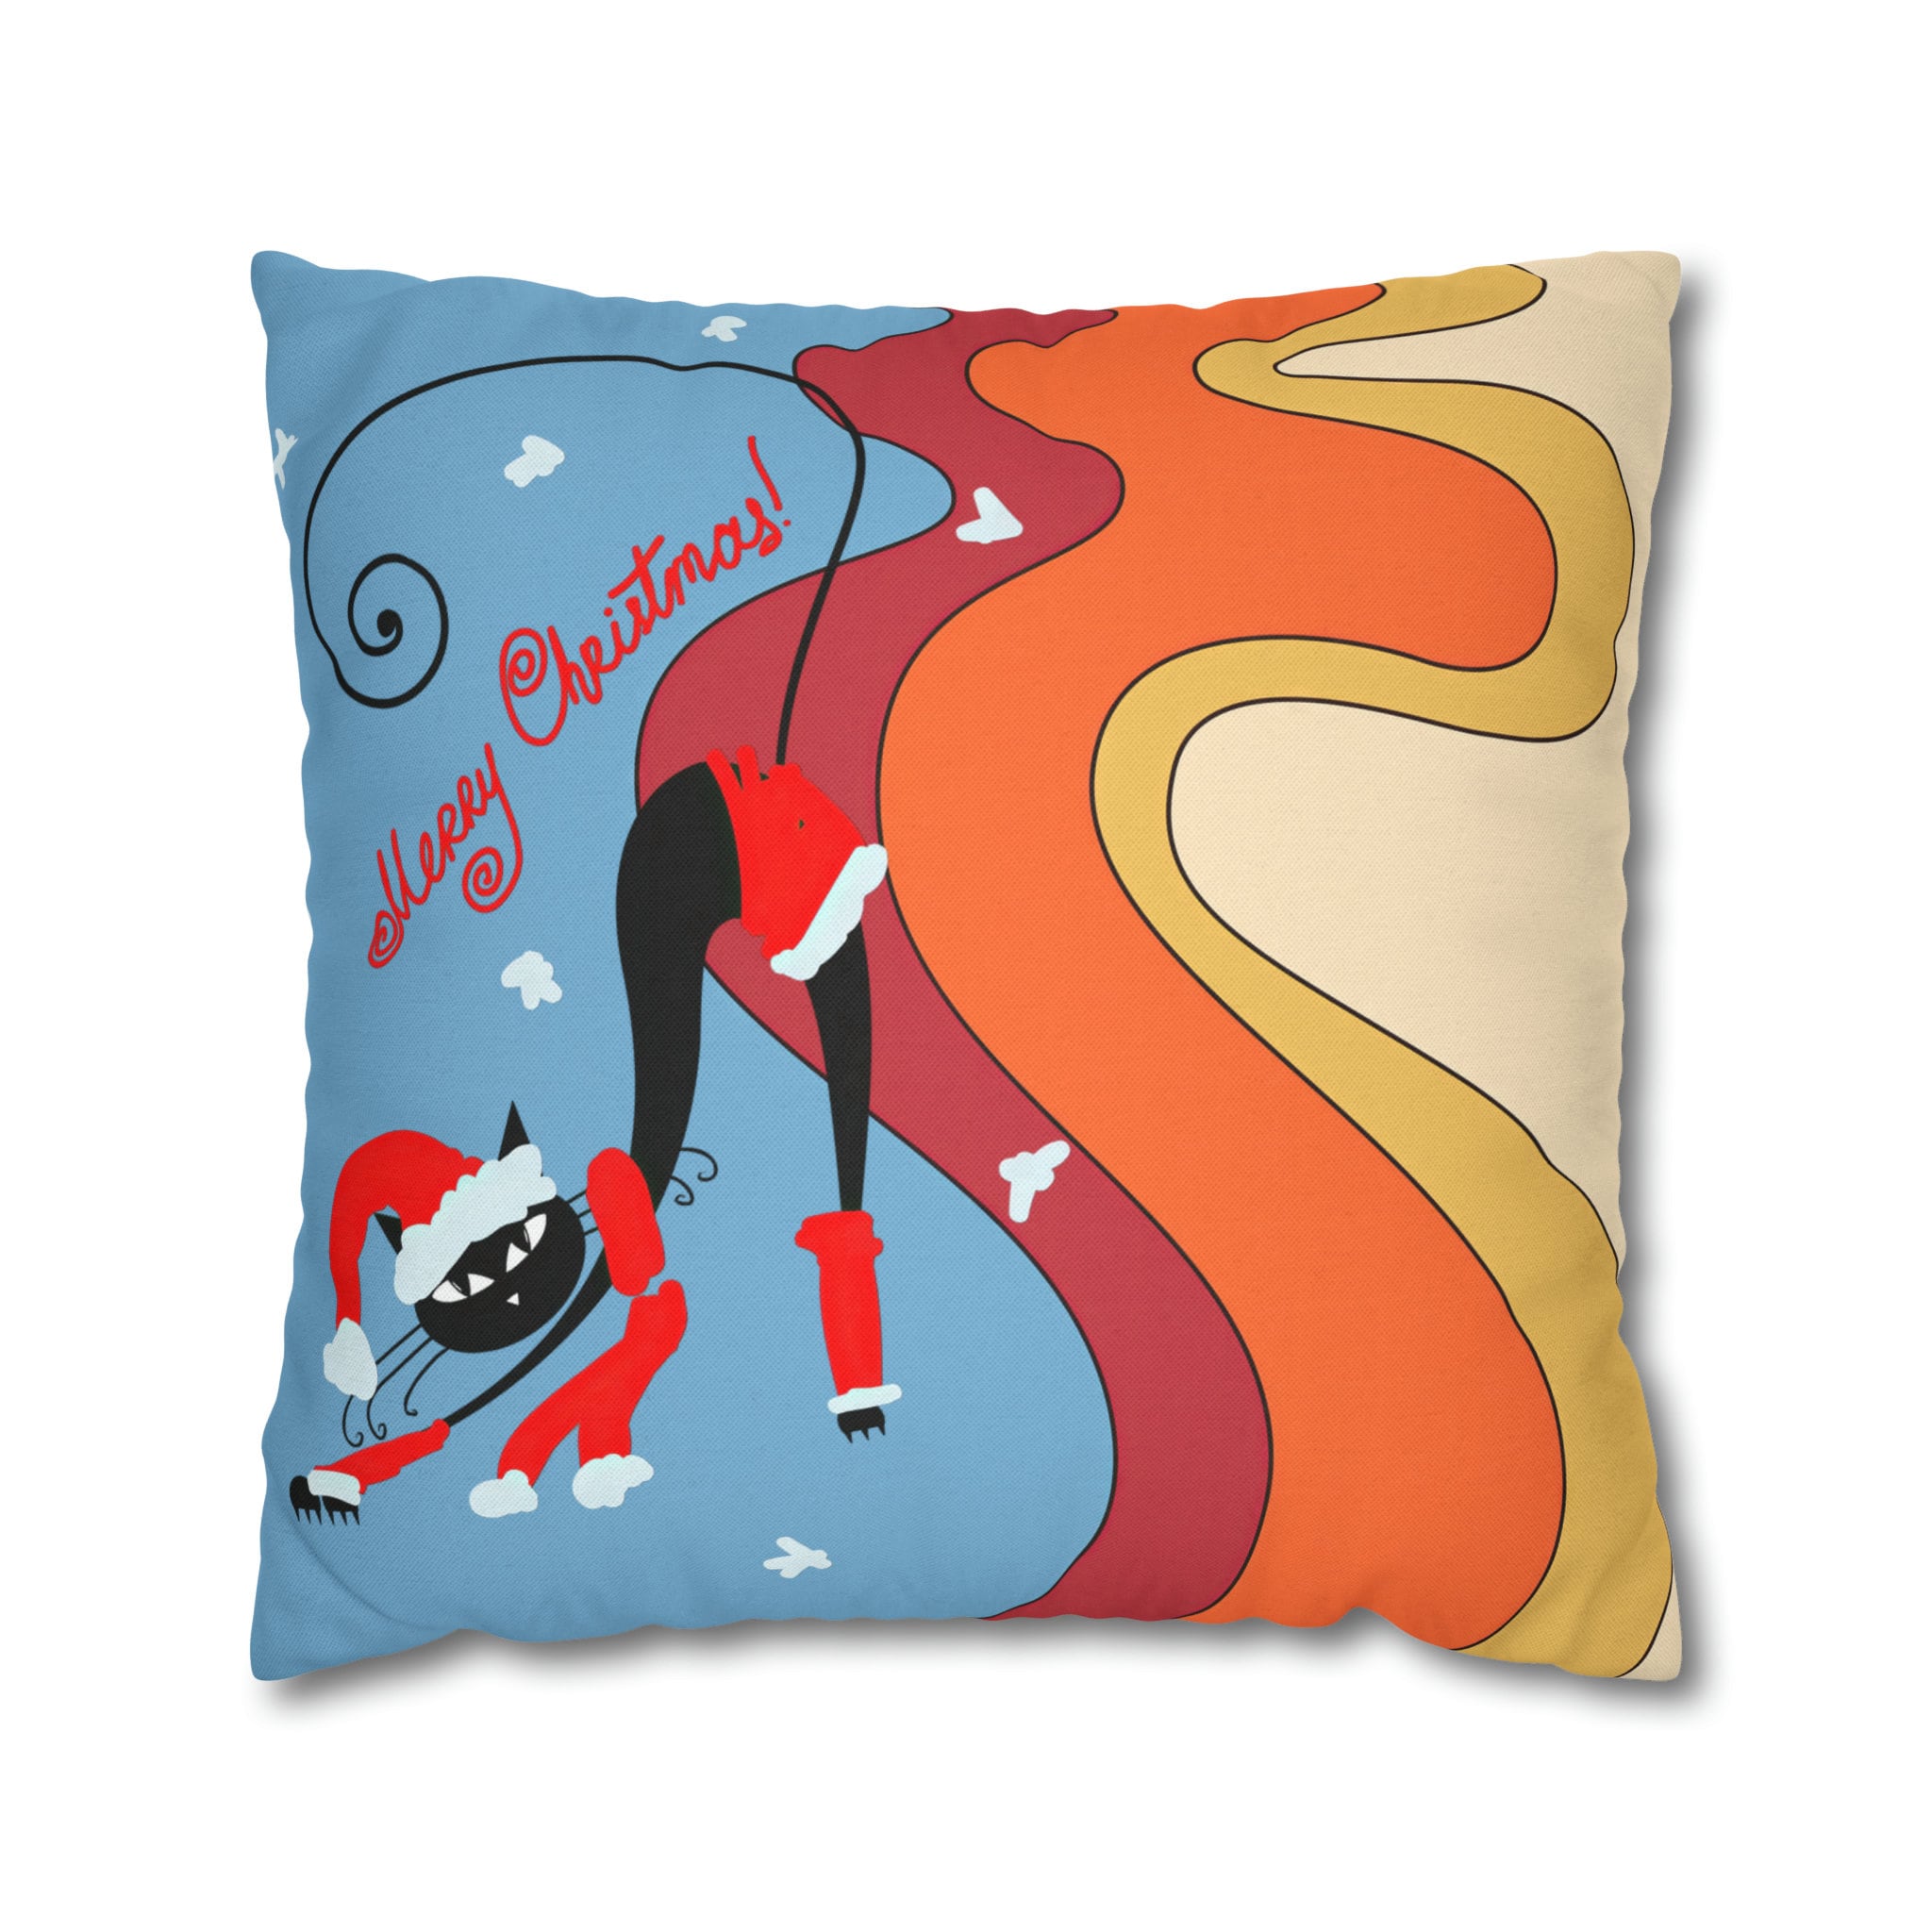 Kate McEnroe New York Groovy Retro Atomic Kitschy Cat Merry Christmas Pillow Cover, Mid Century Modern Cushion Covers, MCM Holiday Pillow CaseThrow Pillow Covers22459229526049089075